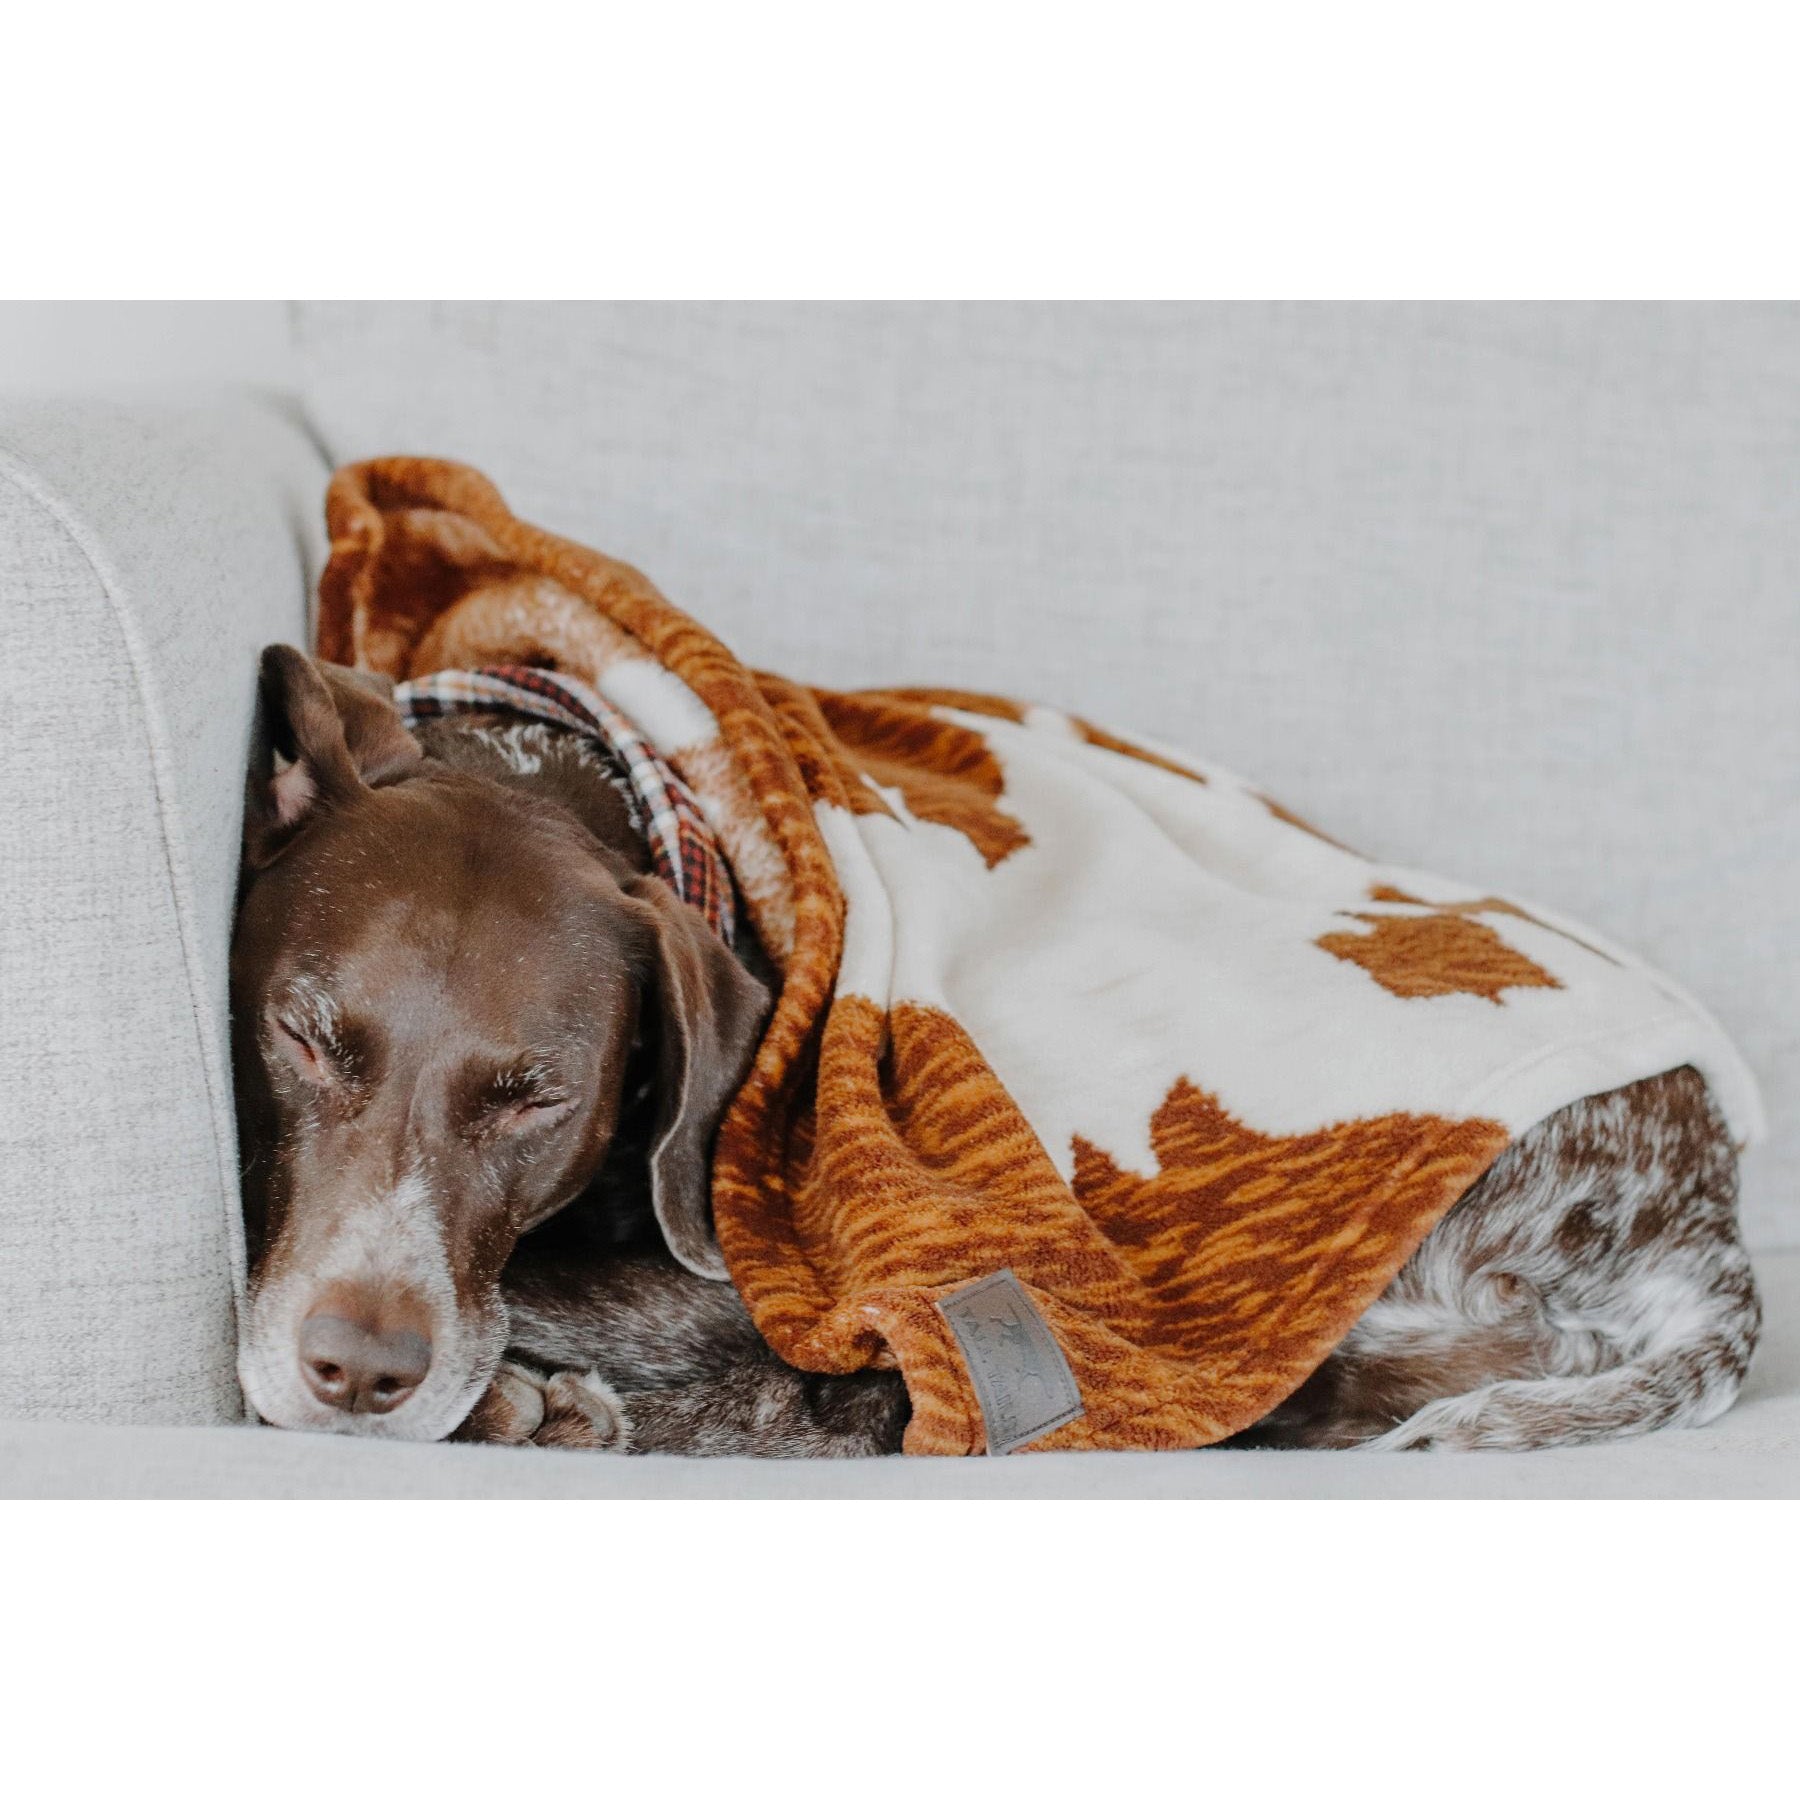 Tall Tails Cowhide Dog Blanket, 30x40